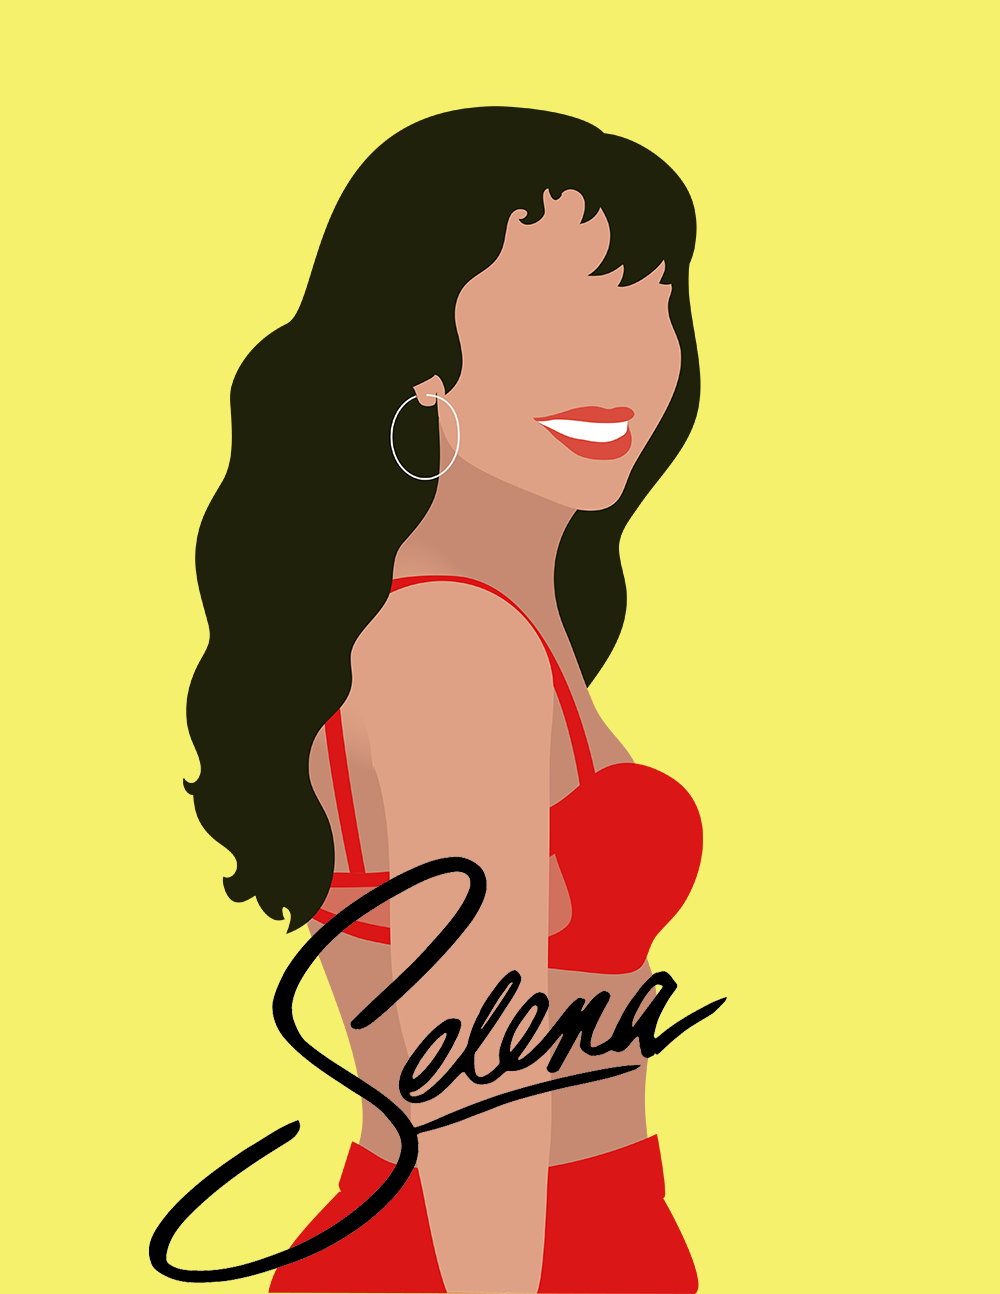 Selena\'s legacy lives on 24 years after her death.